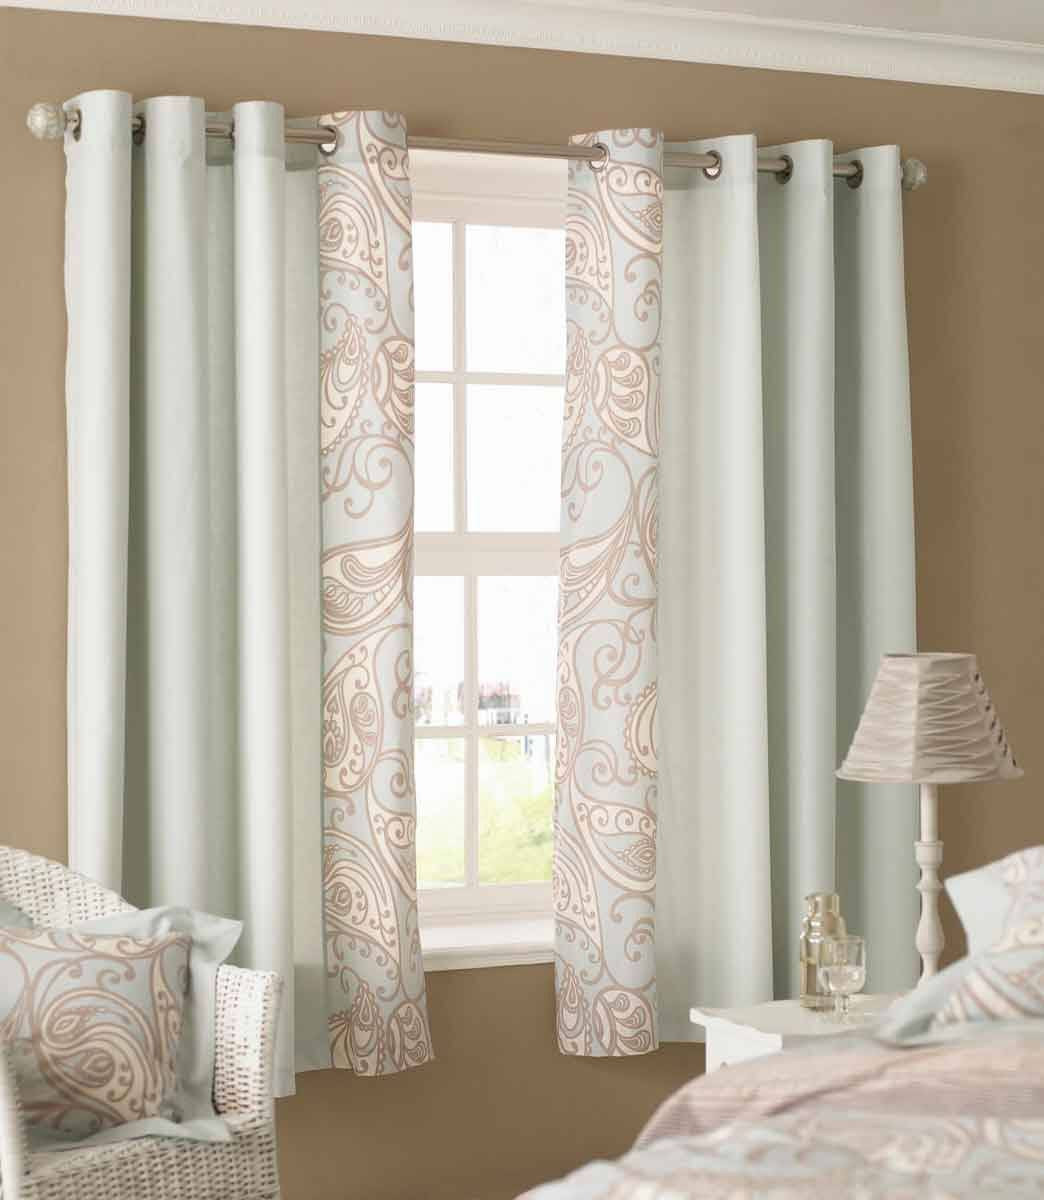 Curtains For Living Room Windows
 25 Cool Living Room Curtain Ideas For Your Farmhouse